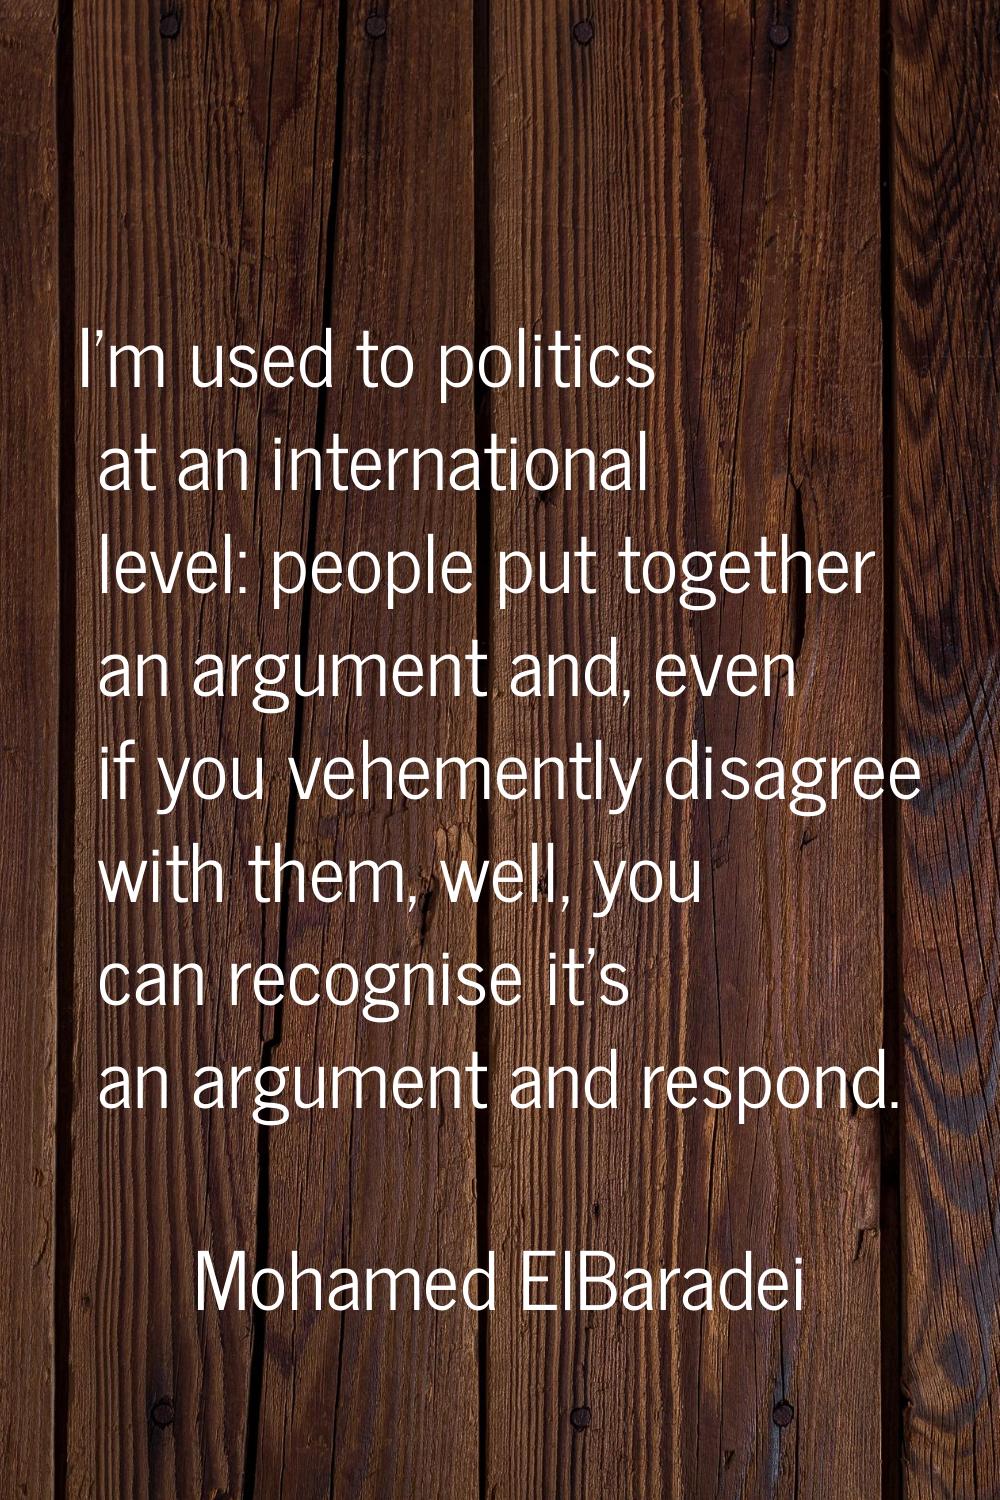 I'm used to politics at an international level: people put together an argument and, even if you ve